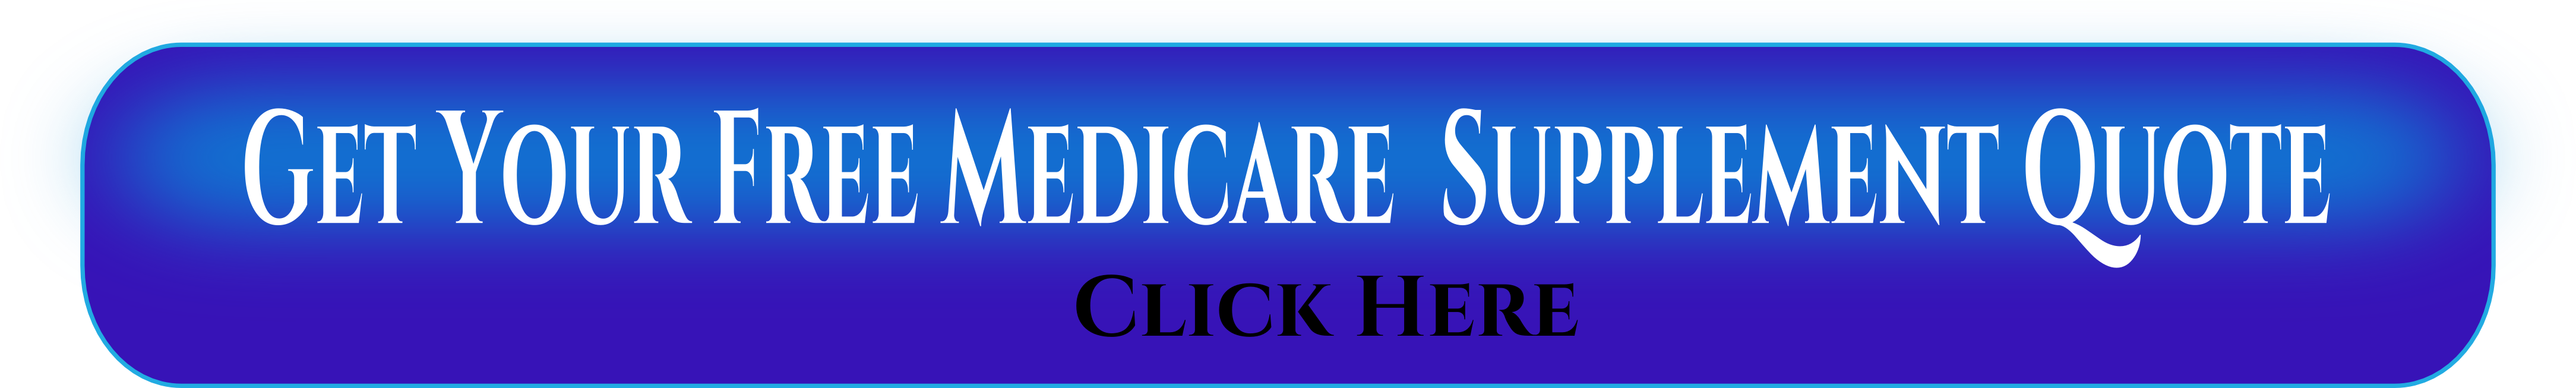 Medicare Supplement quote click here